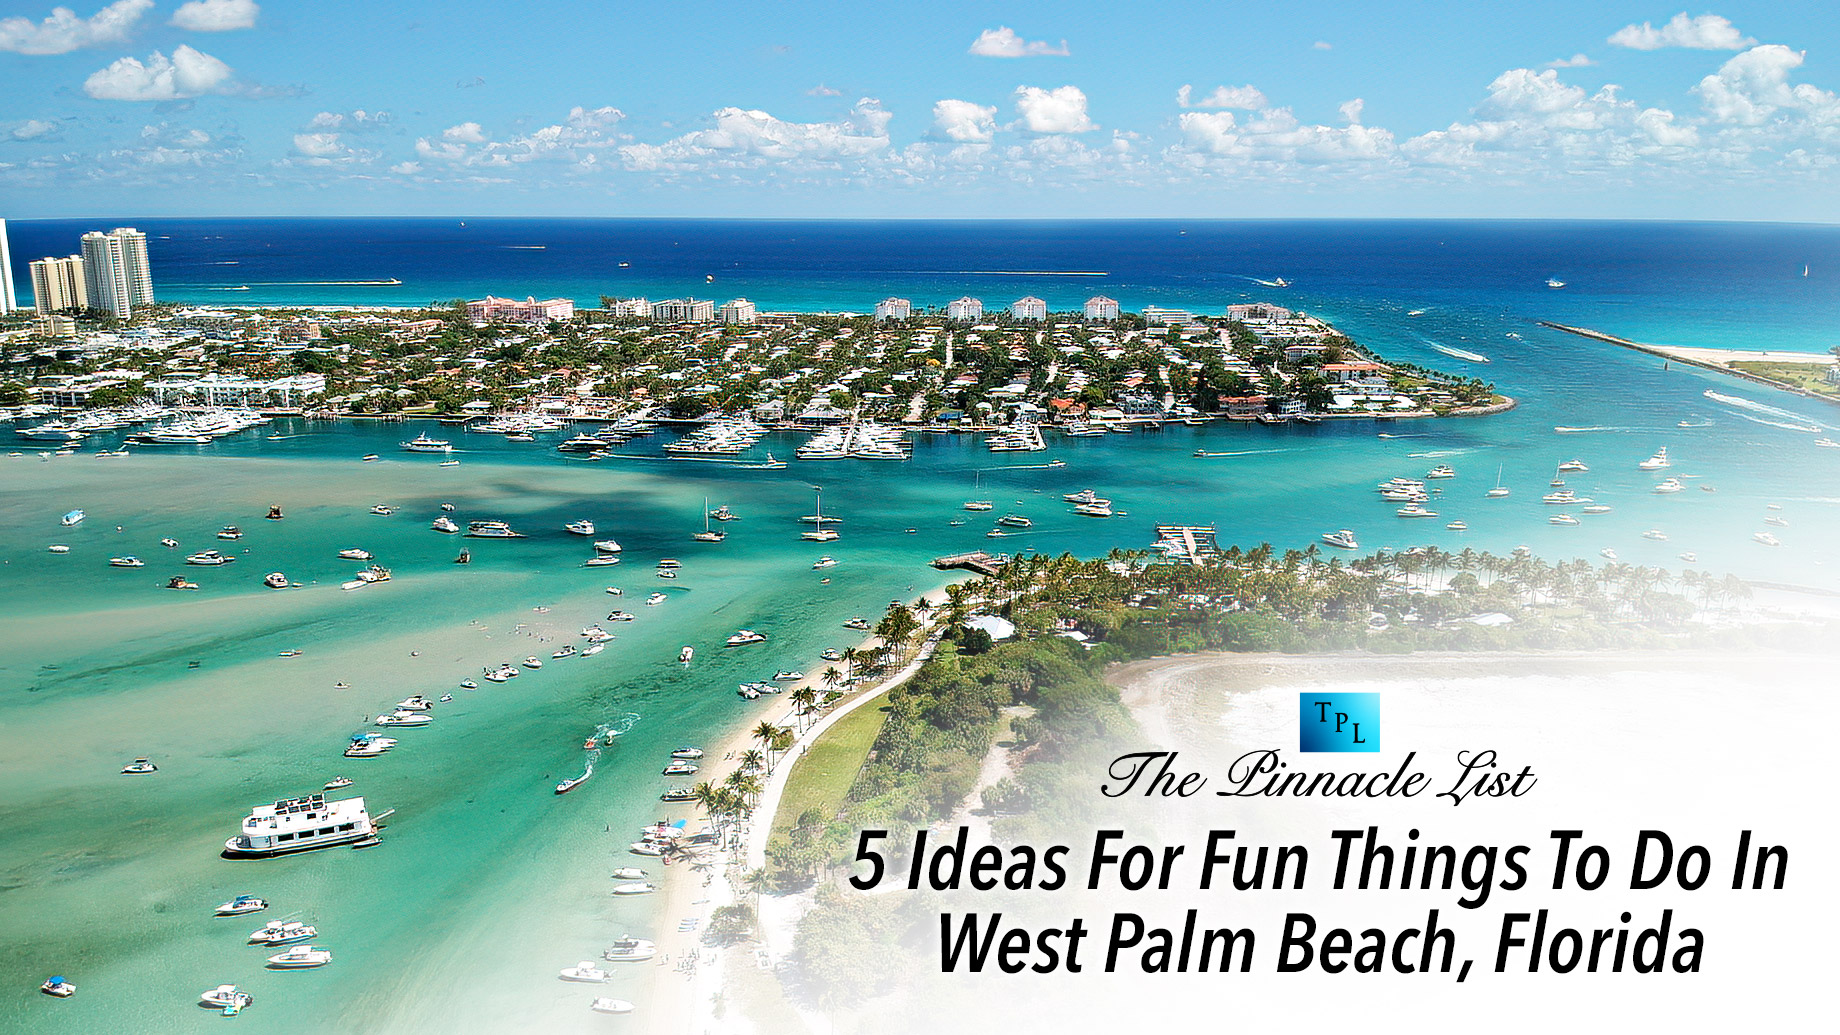 5 Ideas For Fun Things To Do In West Palm Beach, Florida